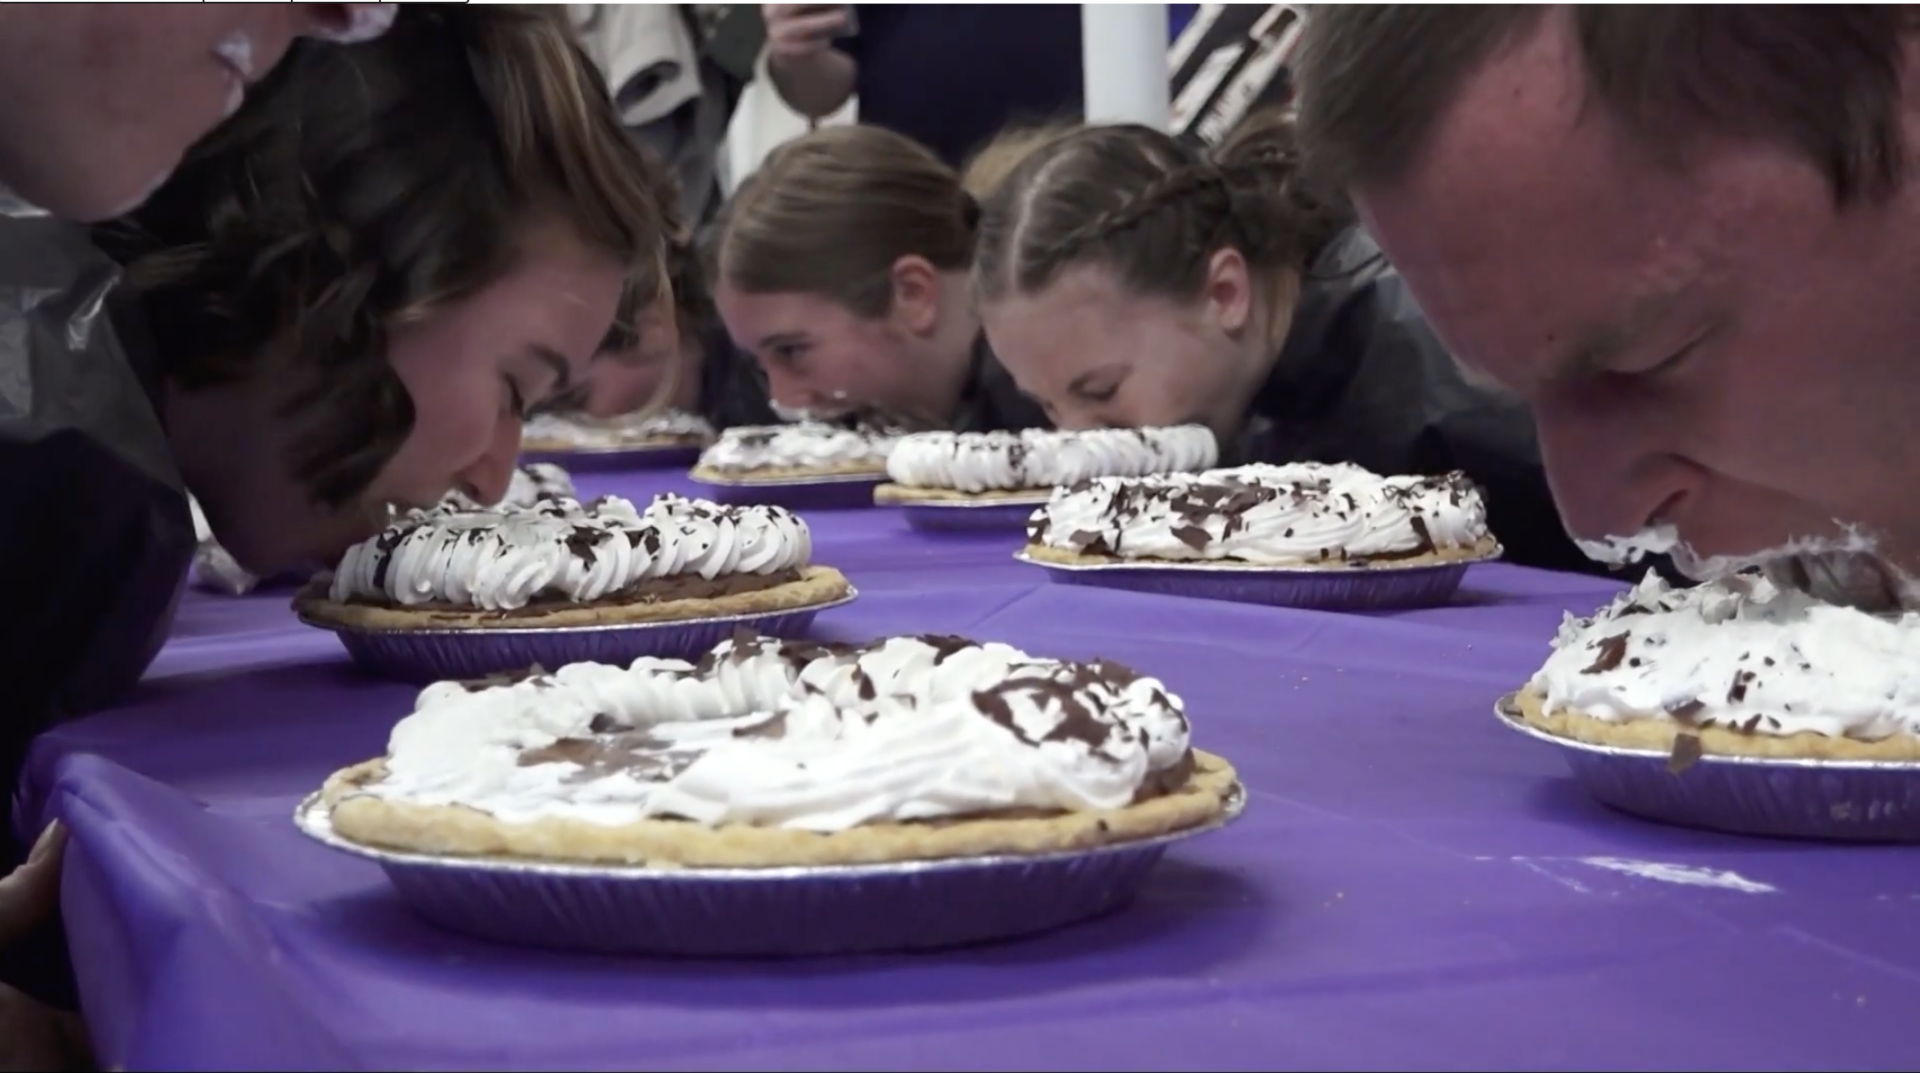 BYU students celebrate March 14, 'Pi Day' - The Daily Universe